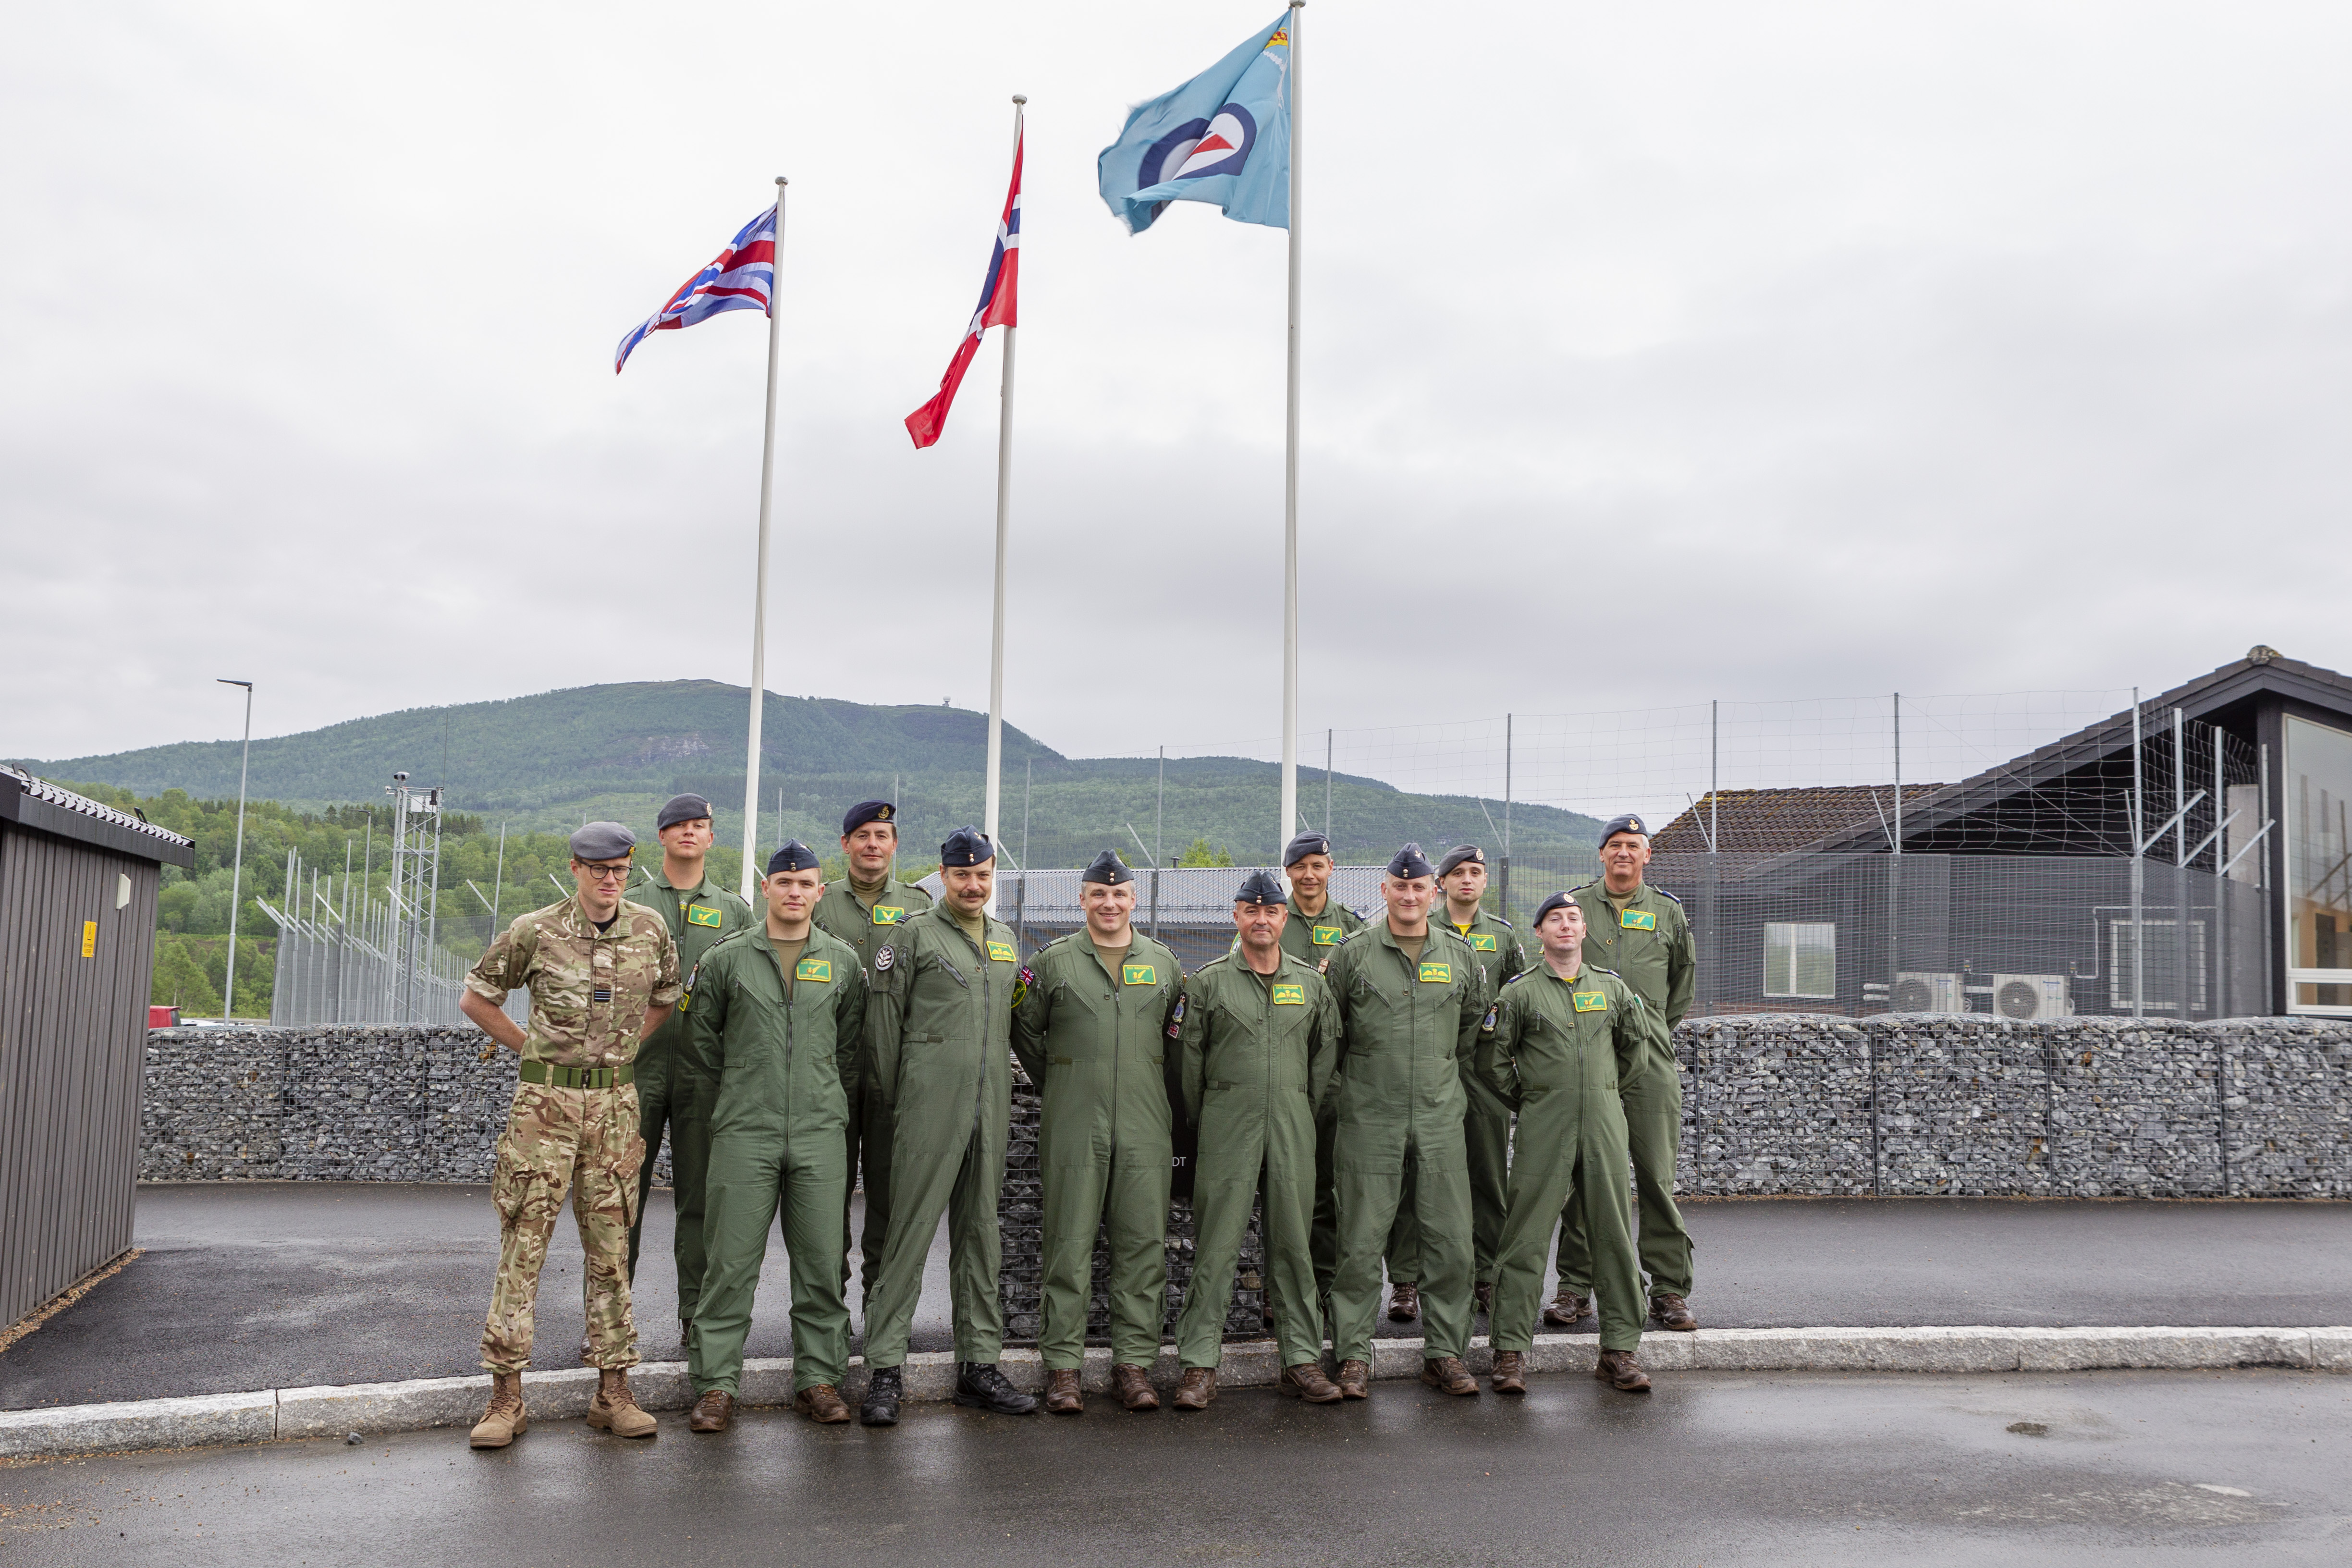 Norwegian and British Air Force personnel